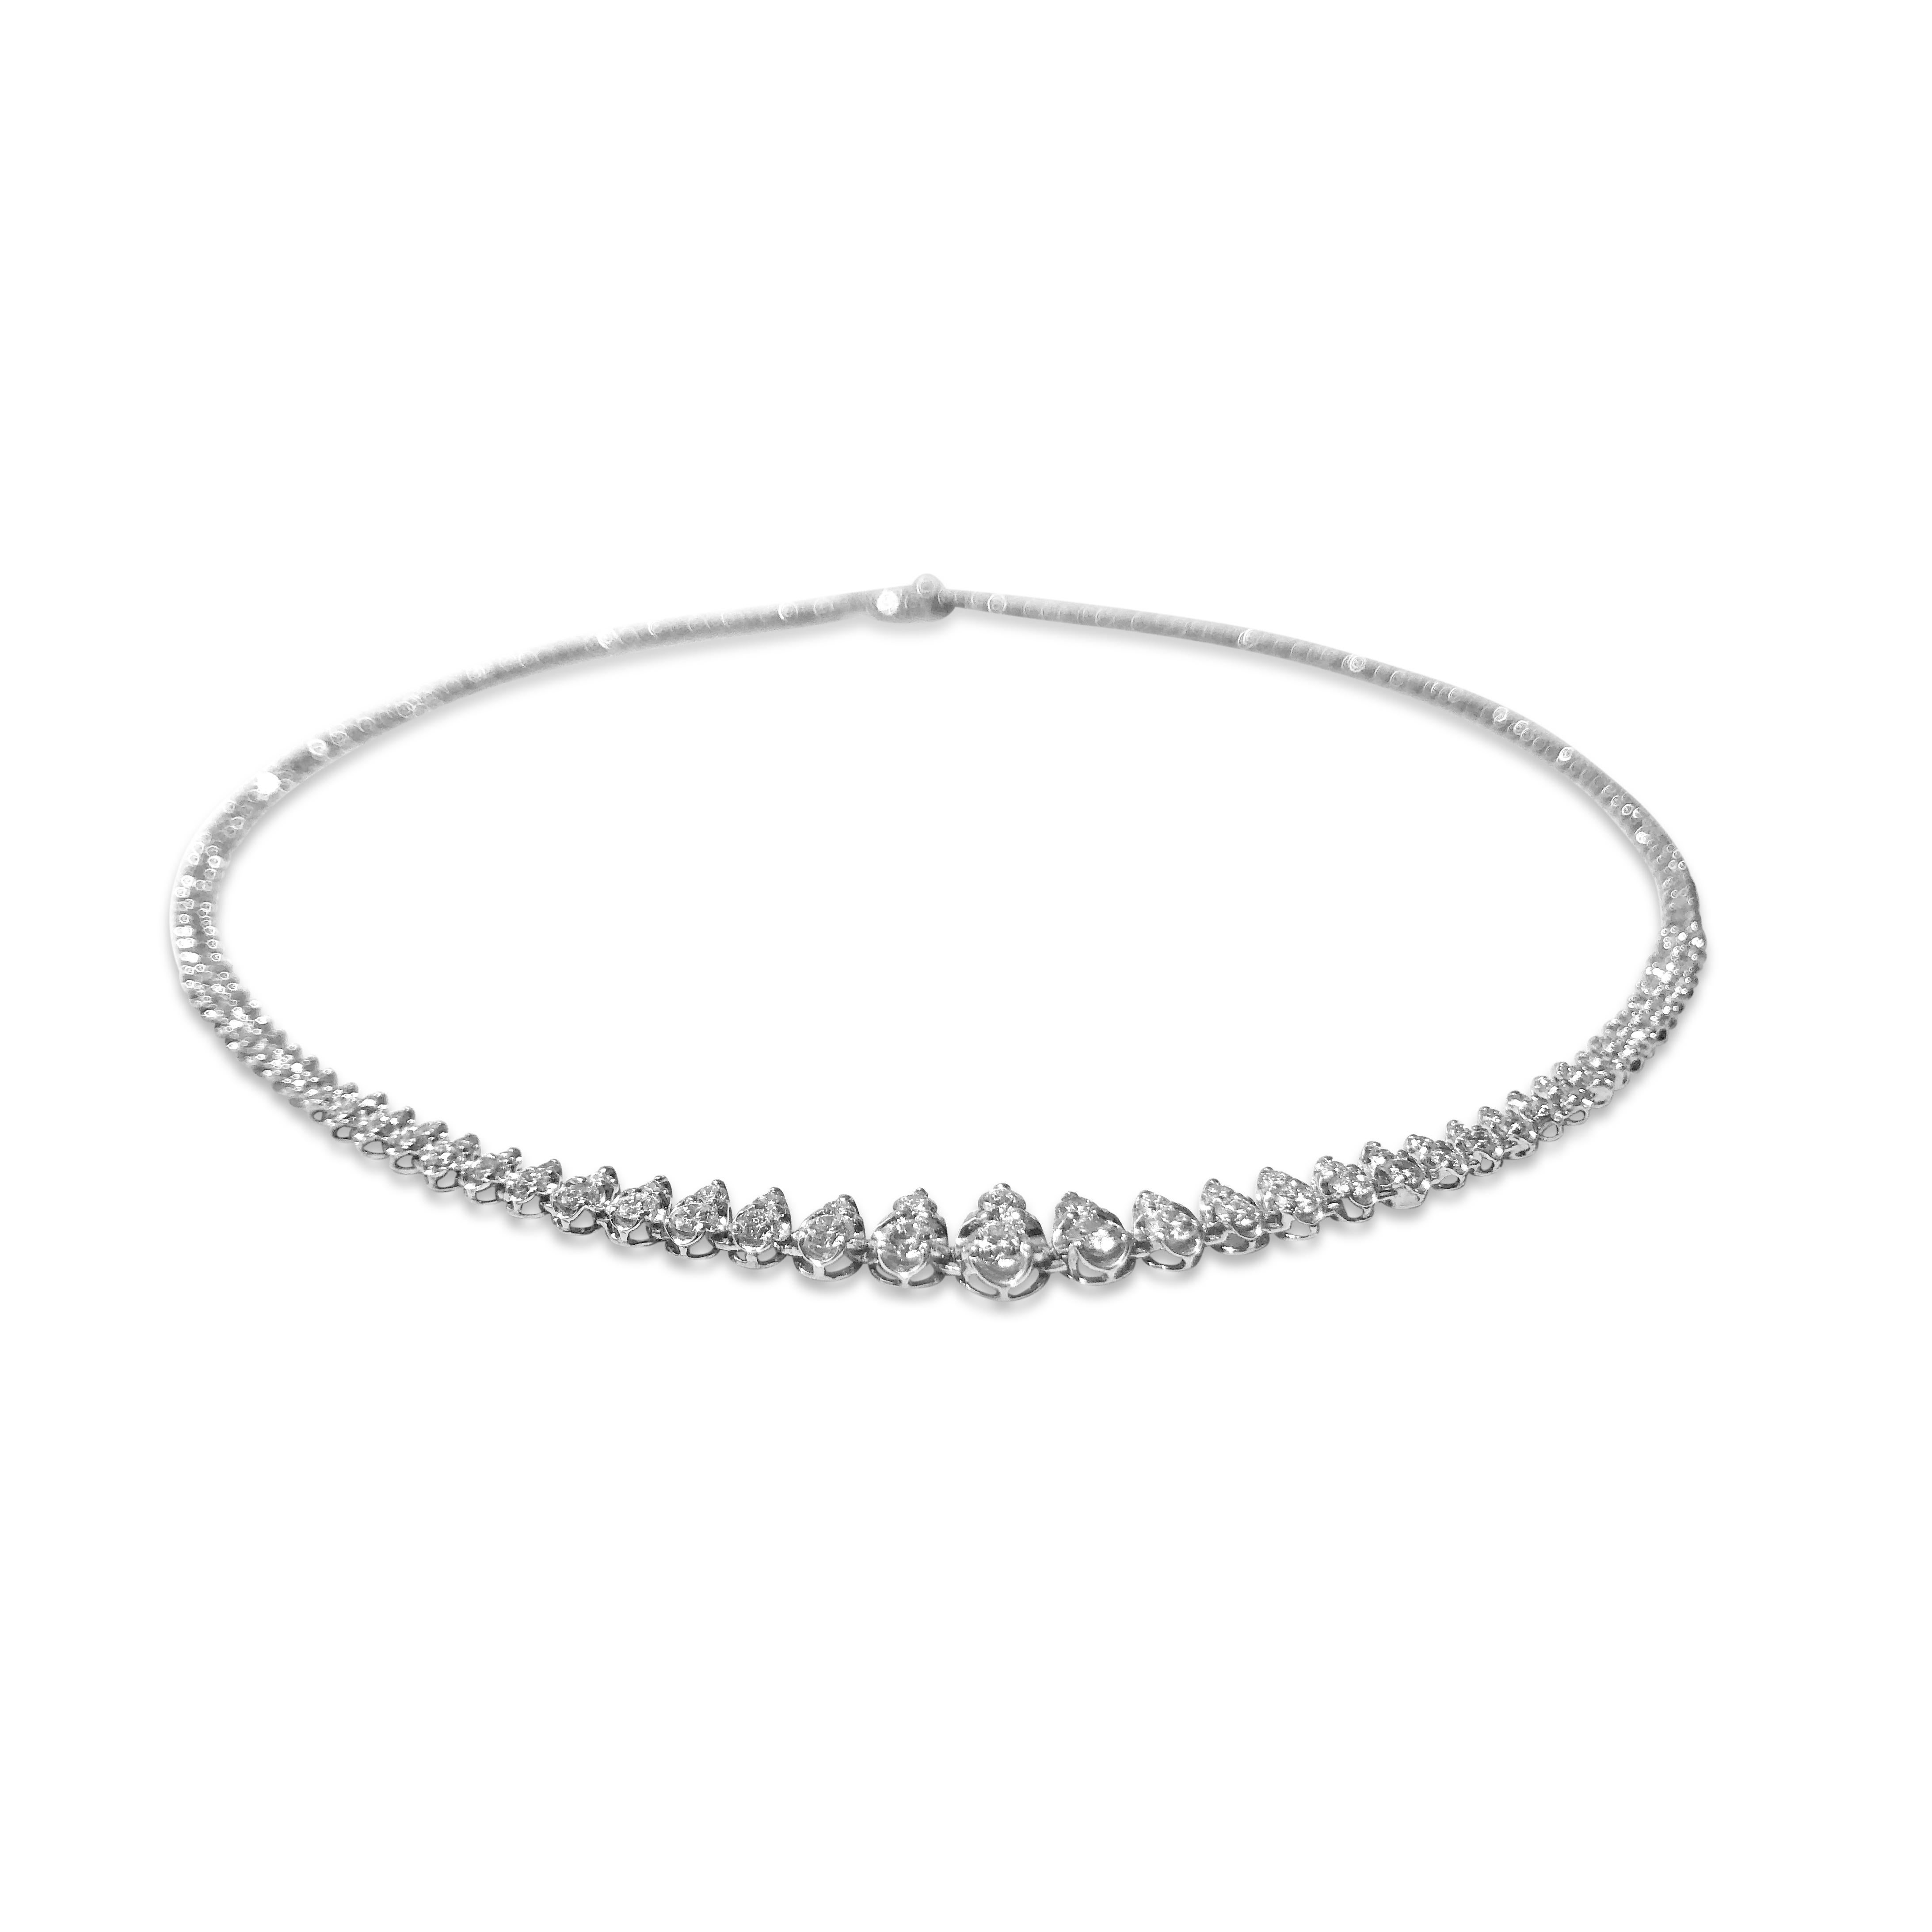 Our brilliant graduated diamond necklace is set in 14K white gold. 202 round white diamonds total 4.18ct, finished off with a secure closure.

Specifications:
- Stone(s): Diamonds
- Diamond-Cut & Clarity: 4.18ct. Round
- Dimension: 16